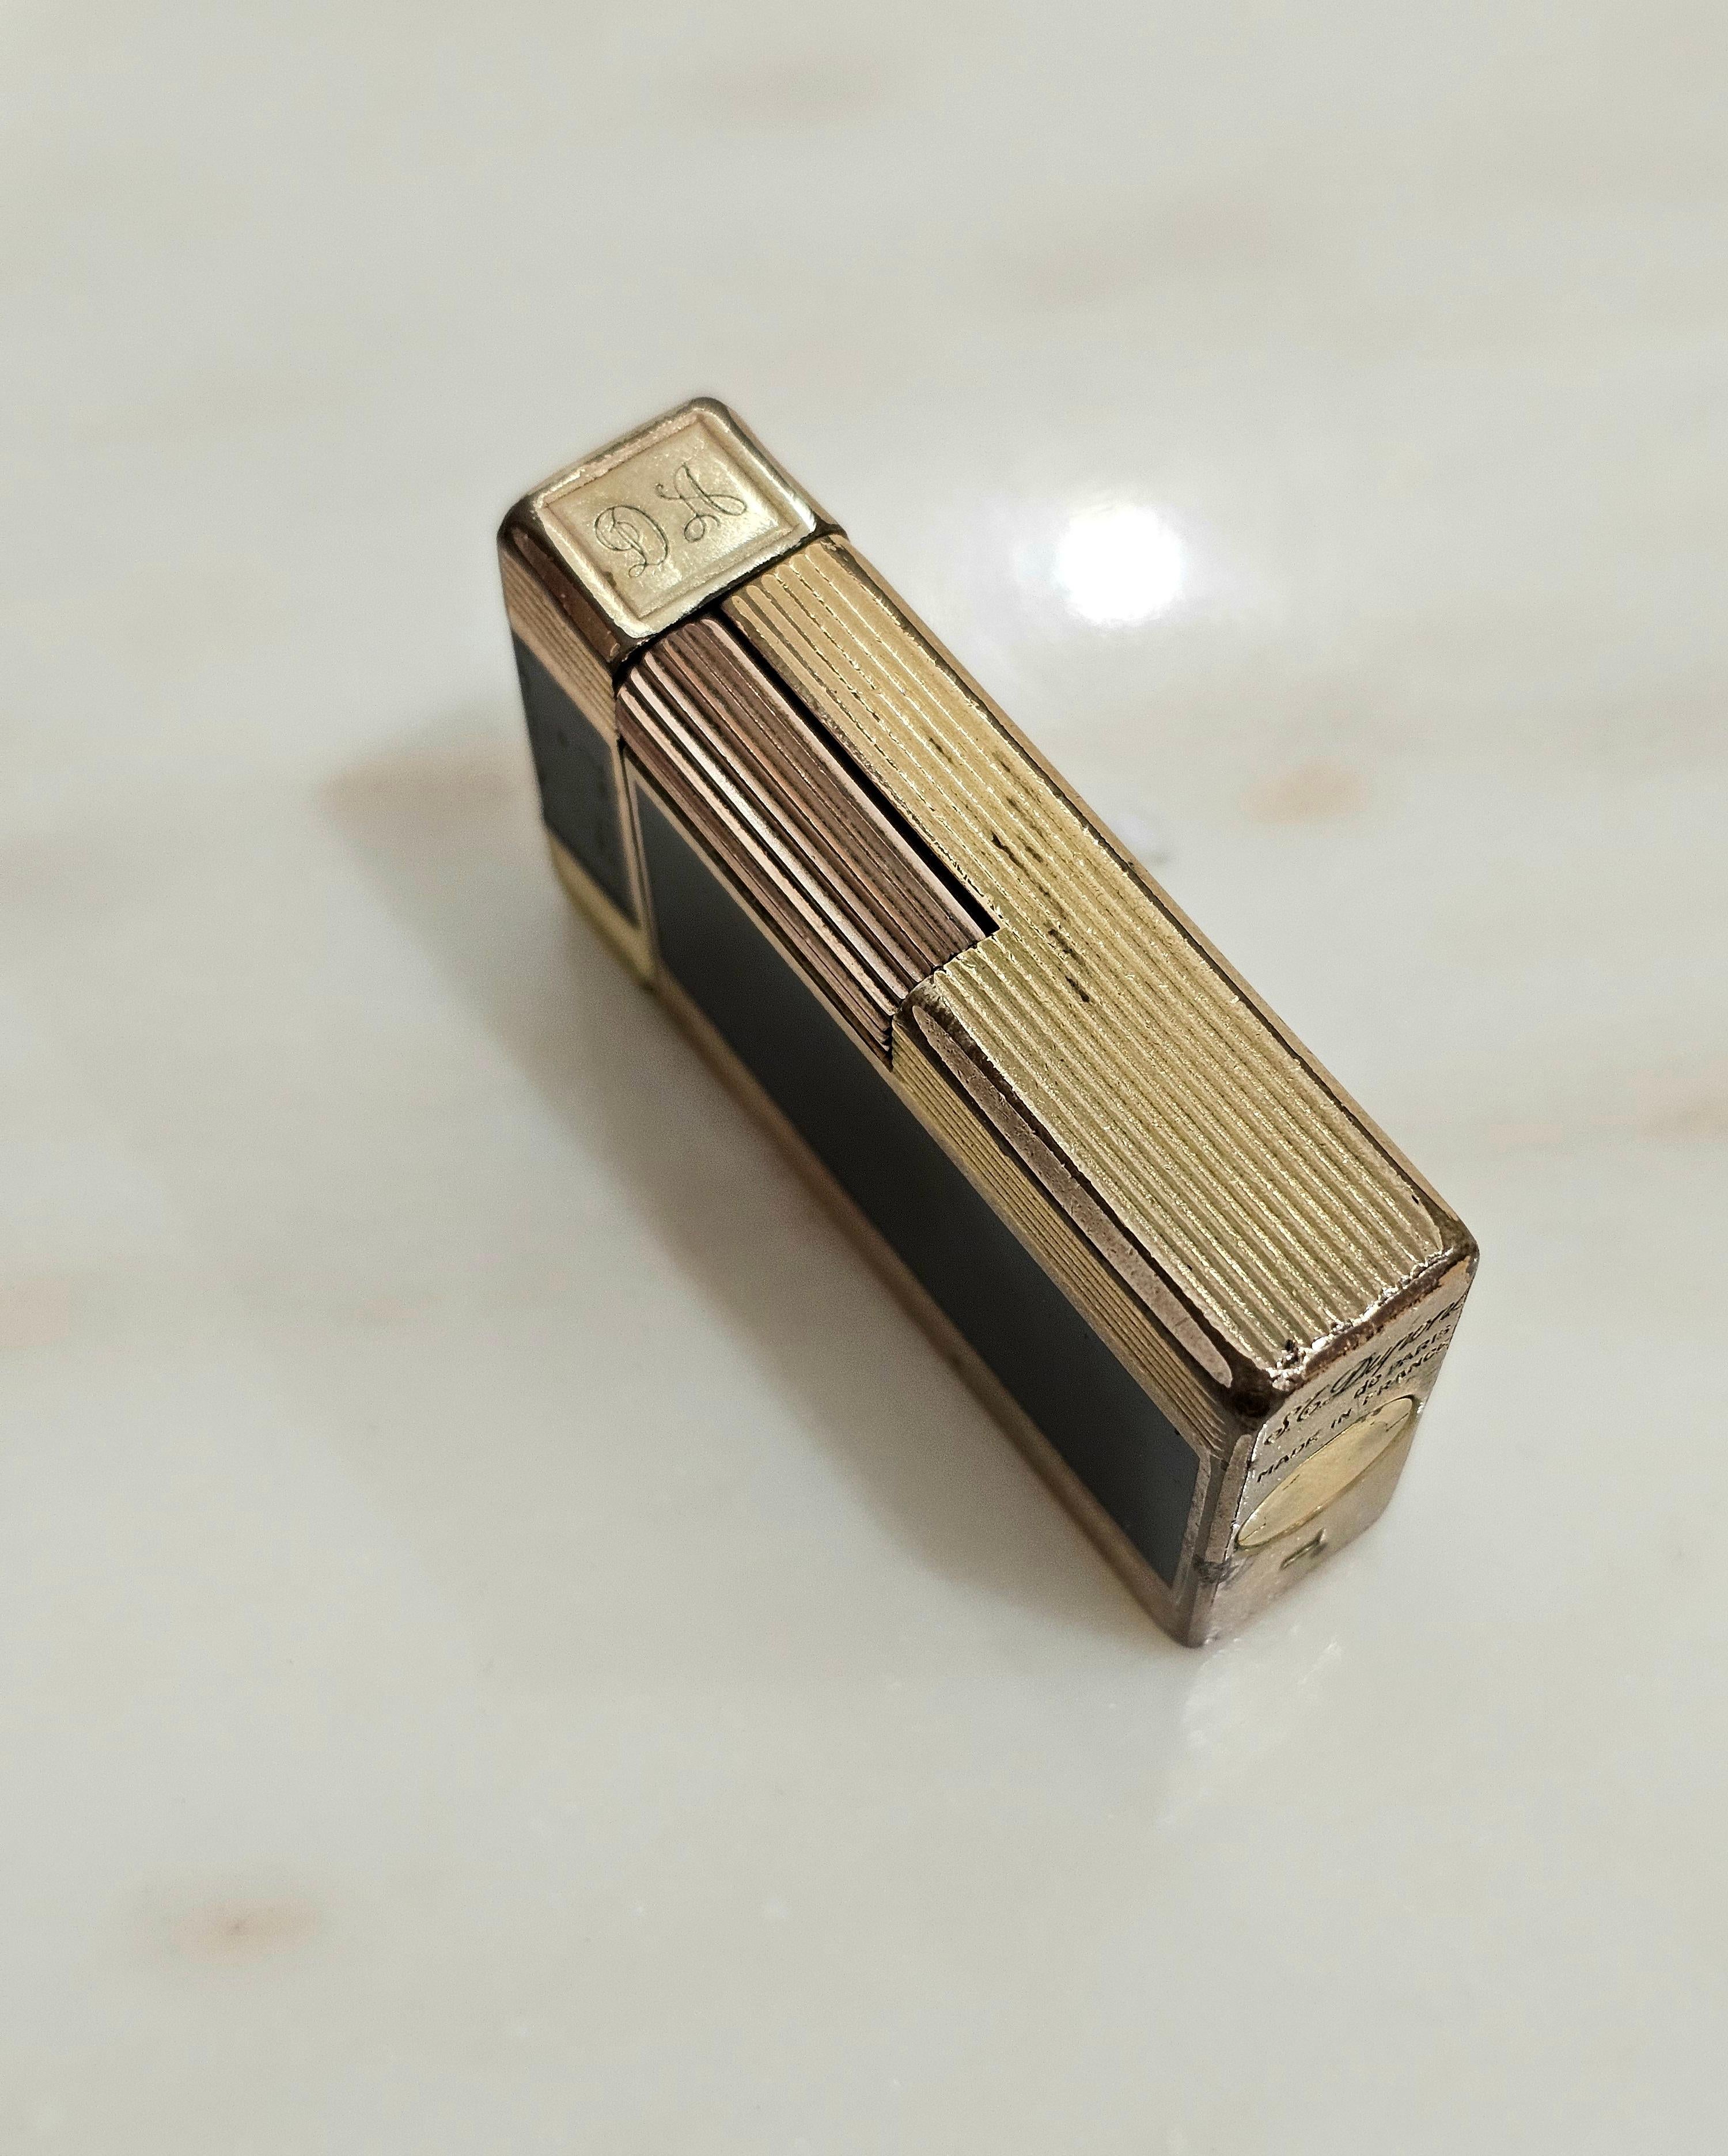 Lighter S.T. Dupont Chinese Lacquer Gold Plated Made In France Midcentury In Good Condition For Sale In Palermo, IT